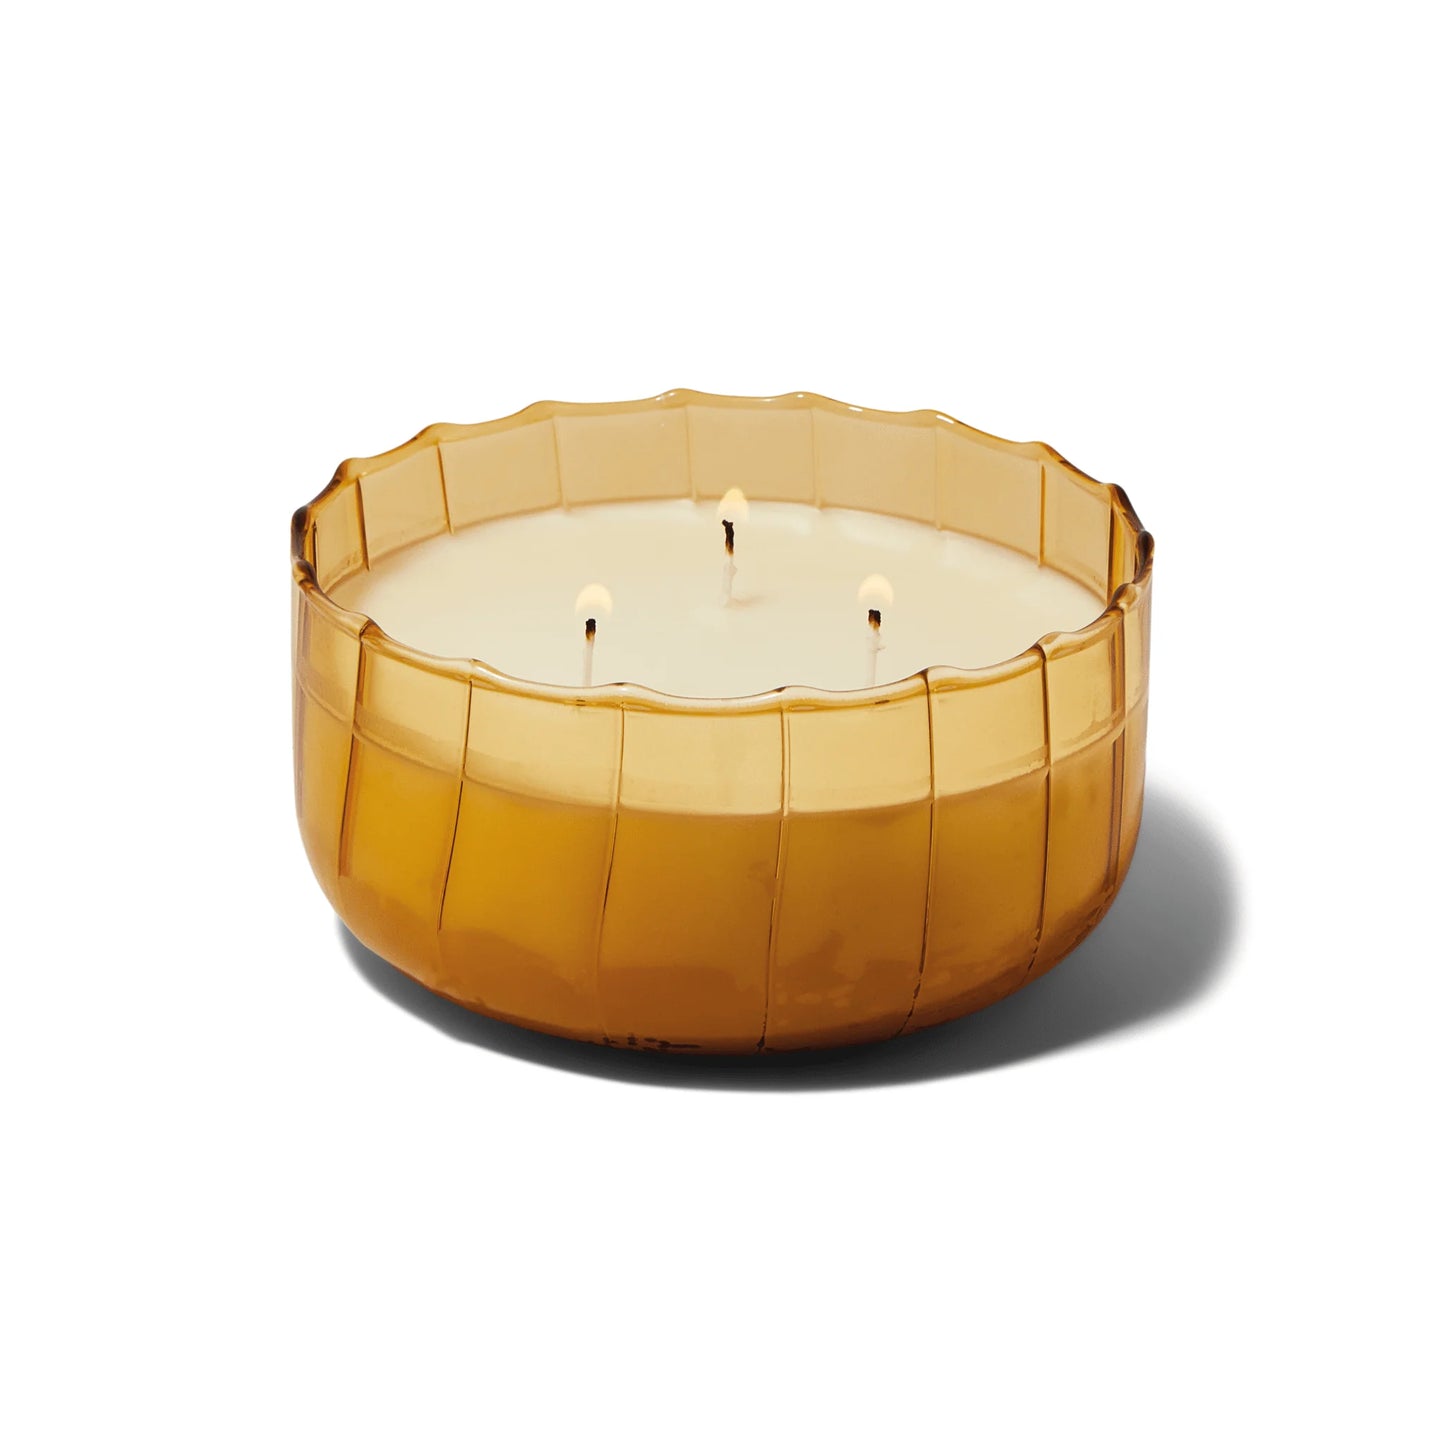 Ripple Collection Golden Ember Candle